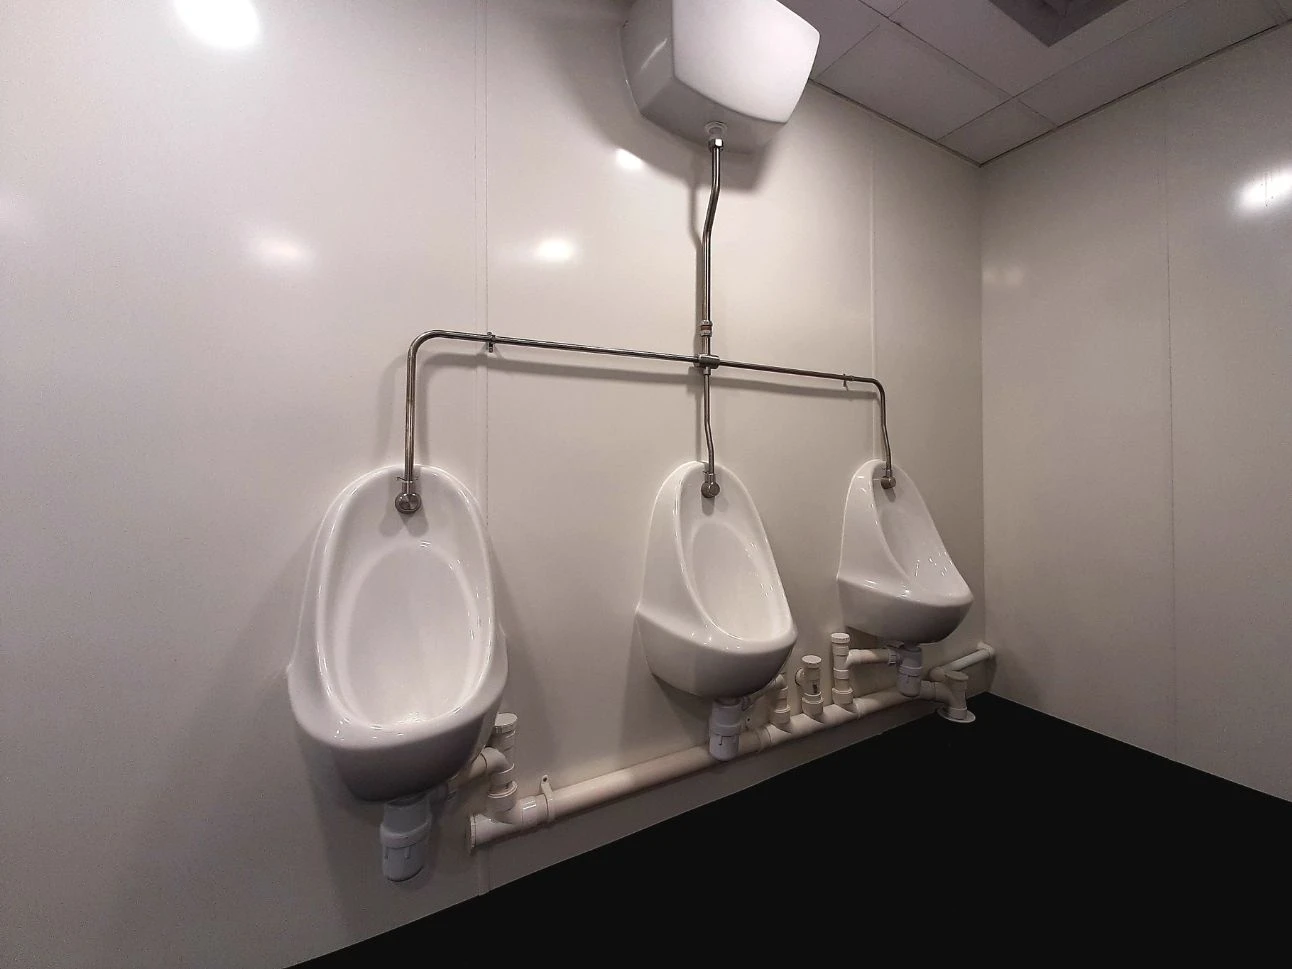 Urinal systems with urinal flush control